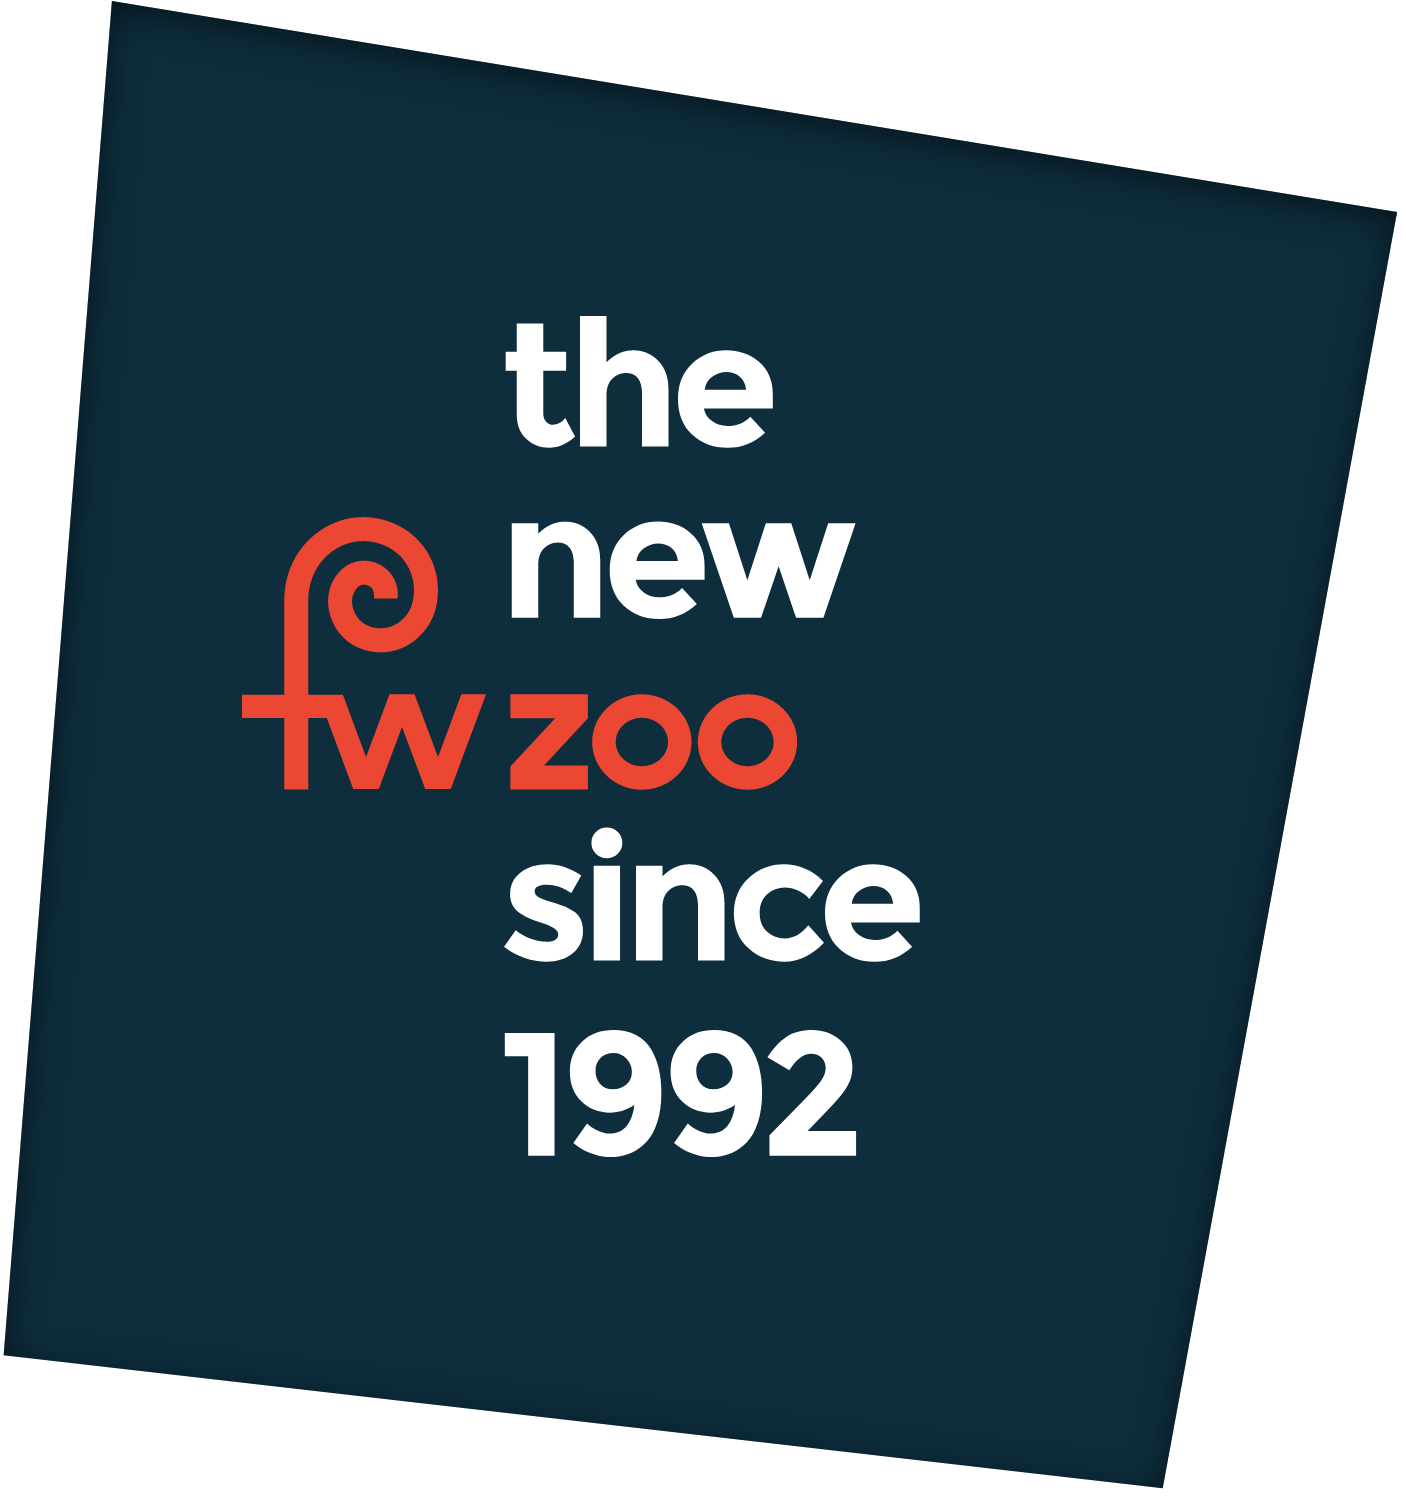 The New FW Zoo Since 1992